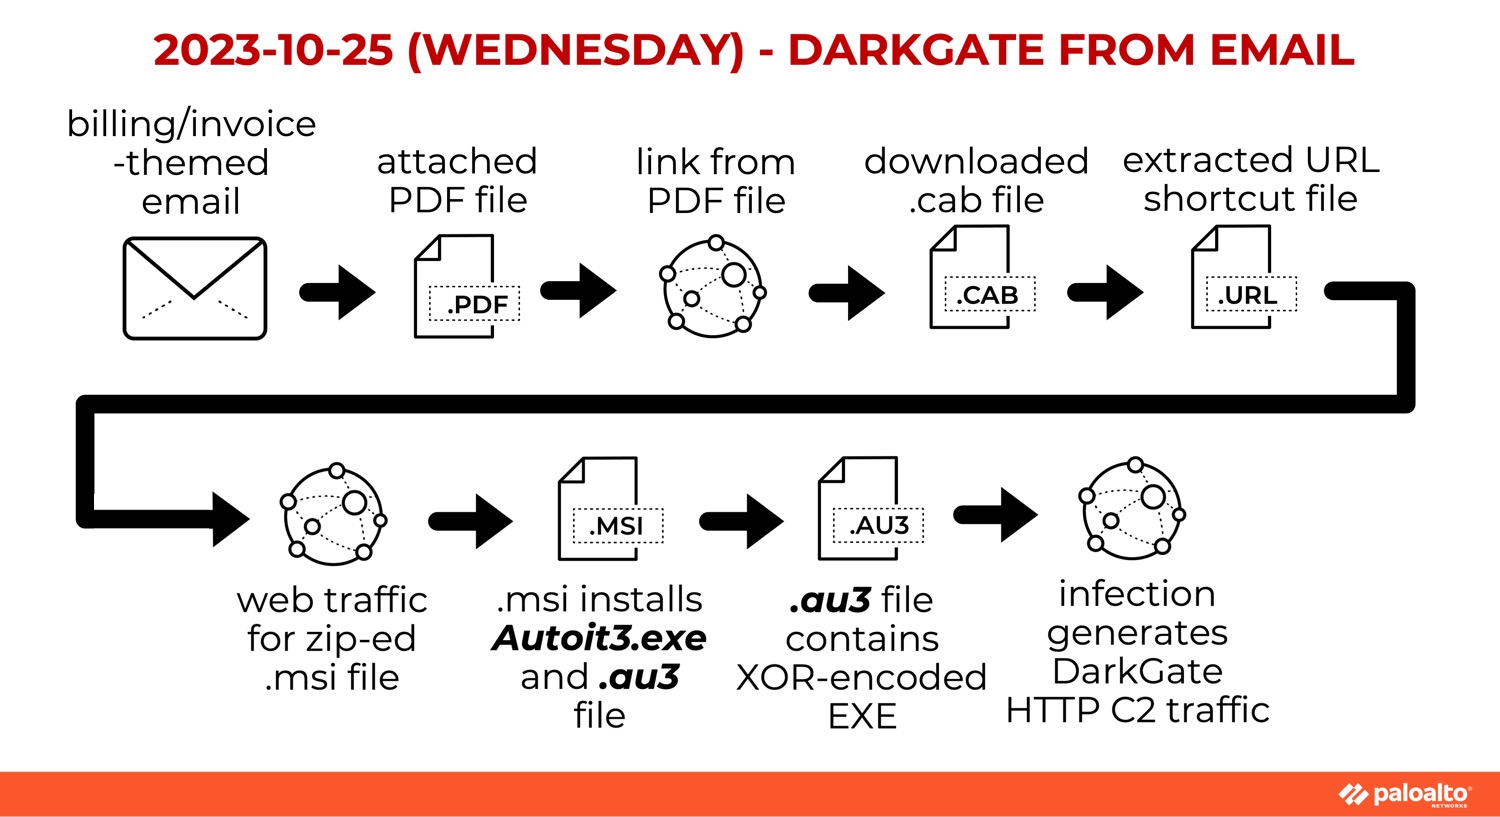 2023-10-25 (Wed) DarkGate from email. billing/invoice-themed email > attached PDF > link from PDF > downloaded .cab > extracted URL from shortcut file > web traffic for zip-ed.msi file > .msi installs Autoit3.exe and .au3 file > .au3 file contains XOR-encoded EXE > infection generates DarkGate HTTP C2 traffic